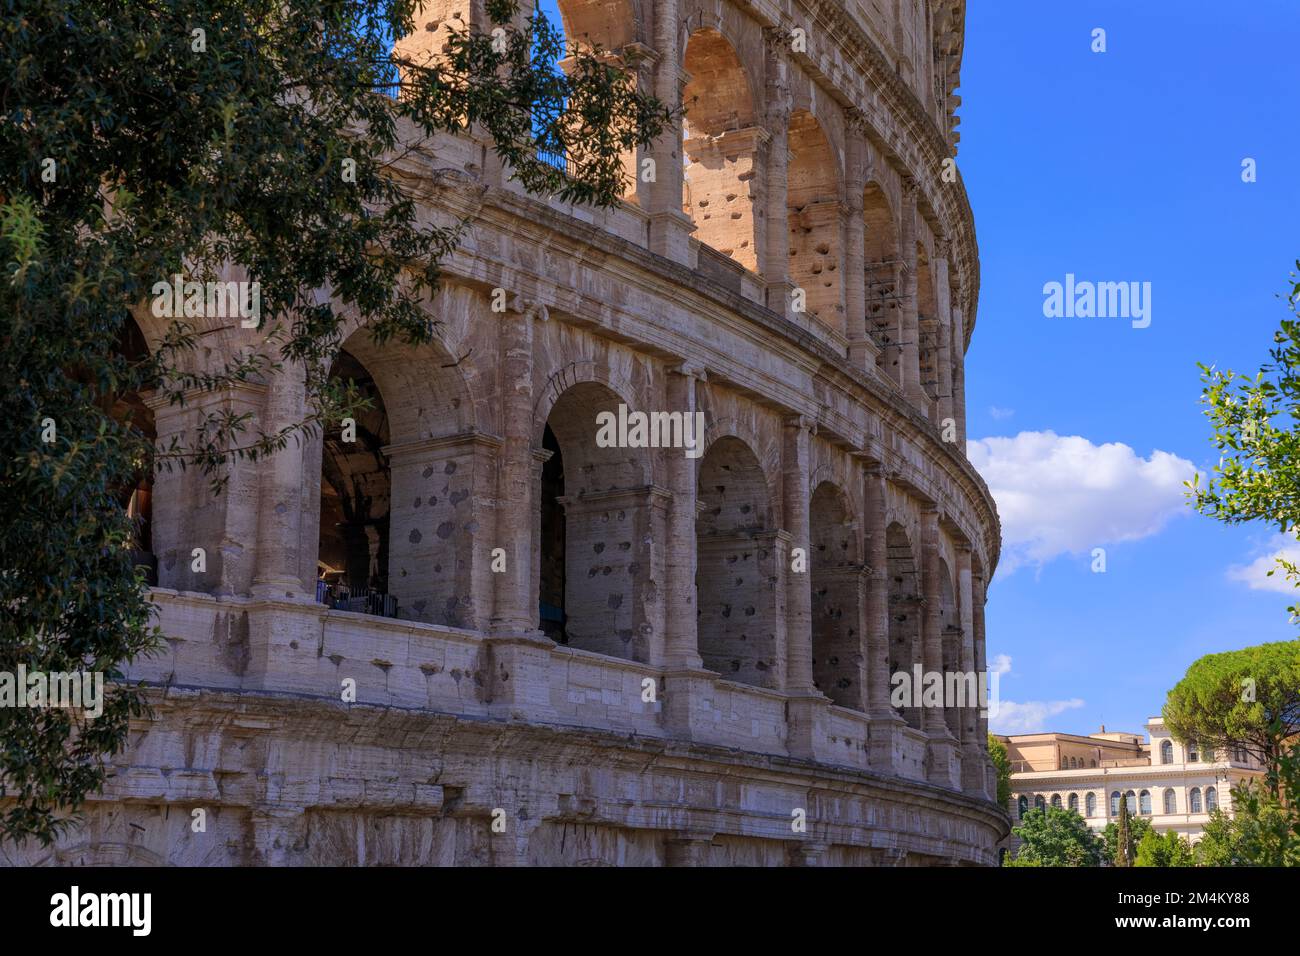 View of the Colosseum in Rome, Italy. Stock Photo